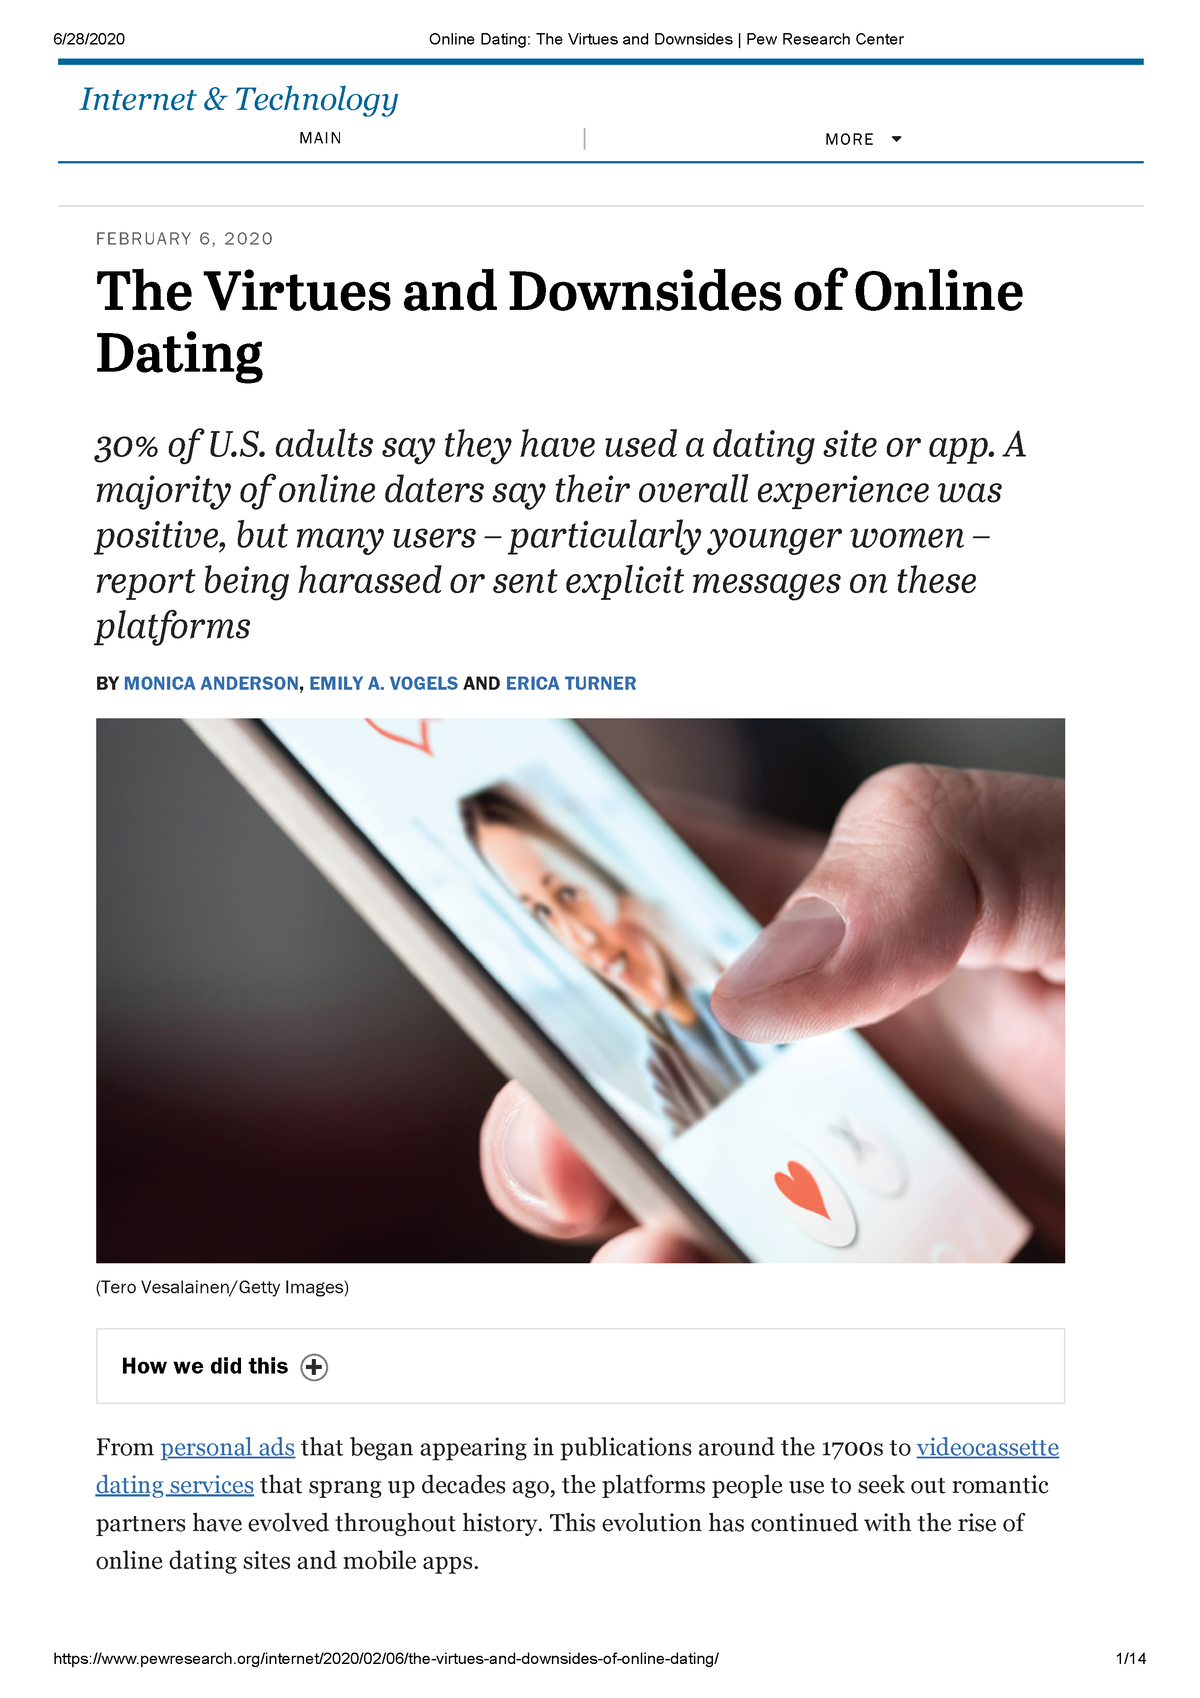 Online Dating The Virtues And Downsides Pew Research Center Article